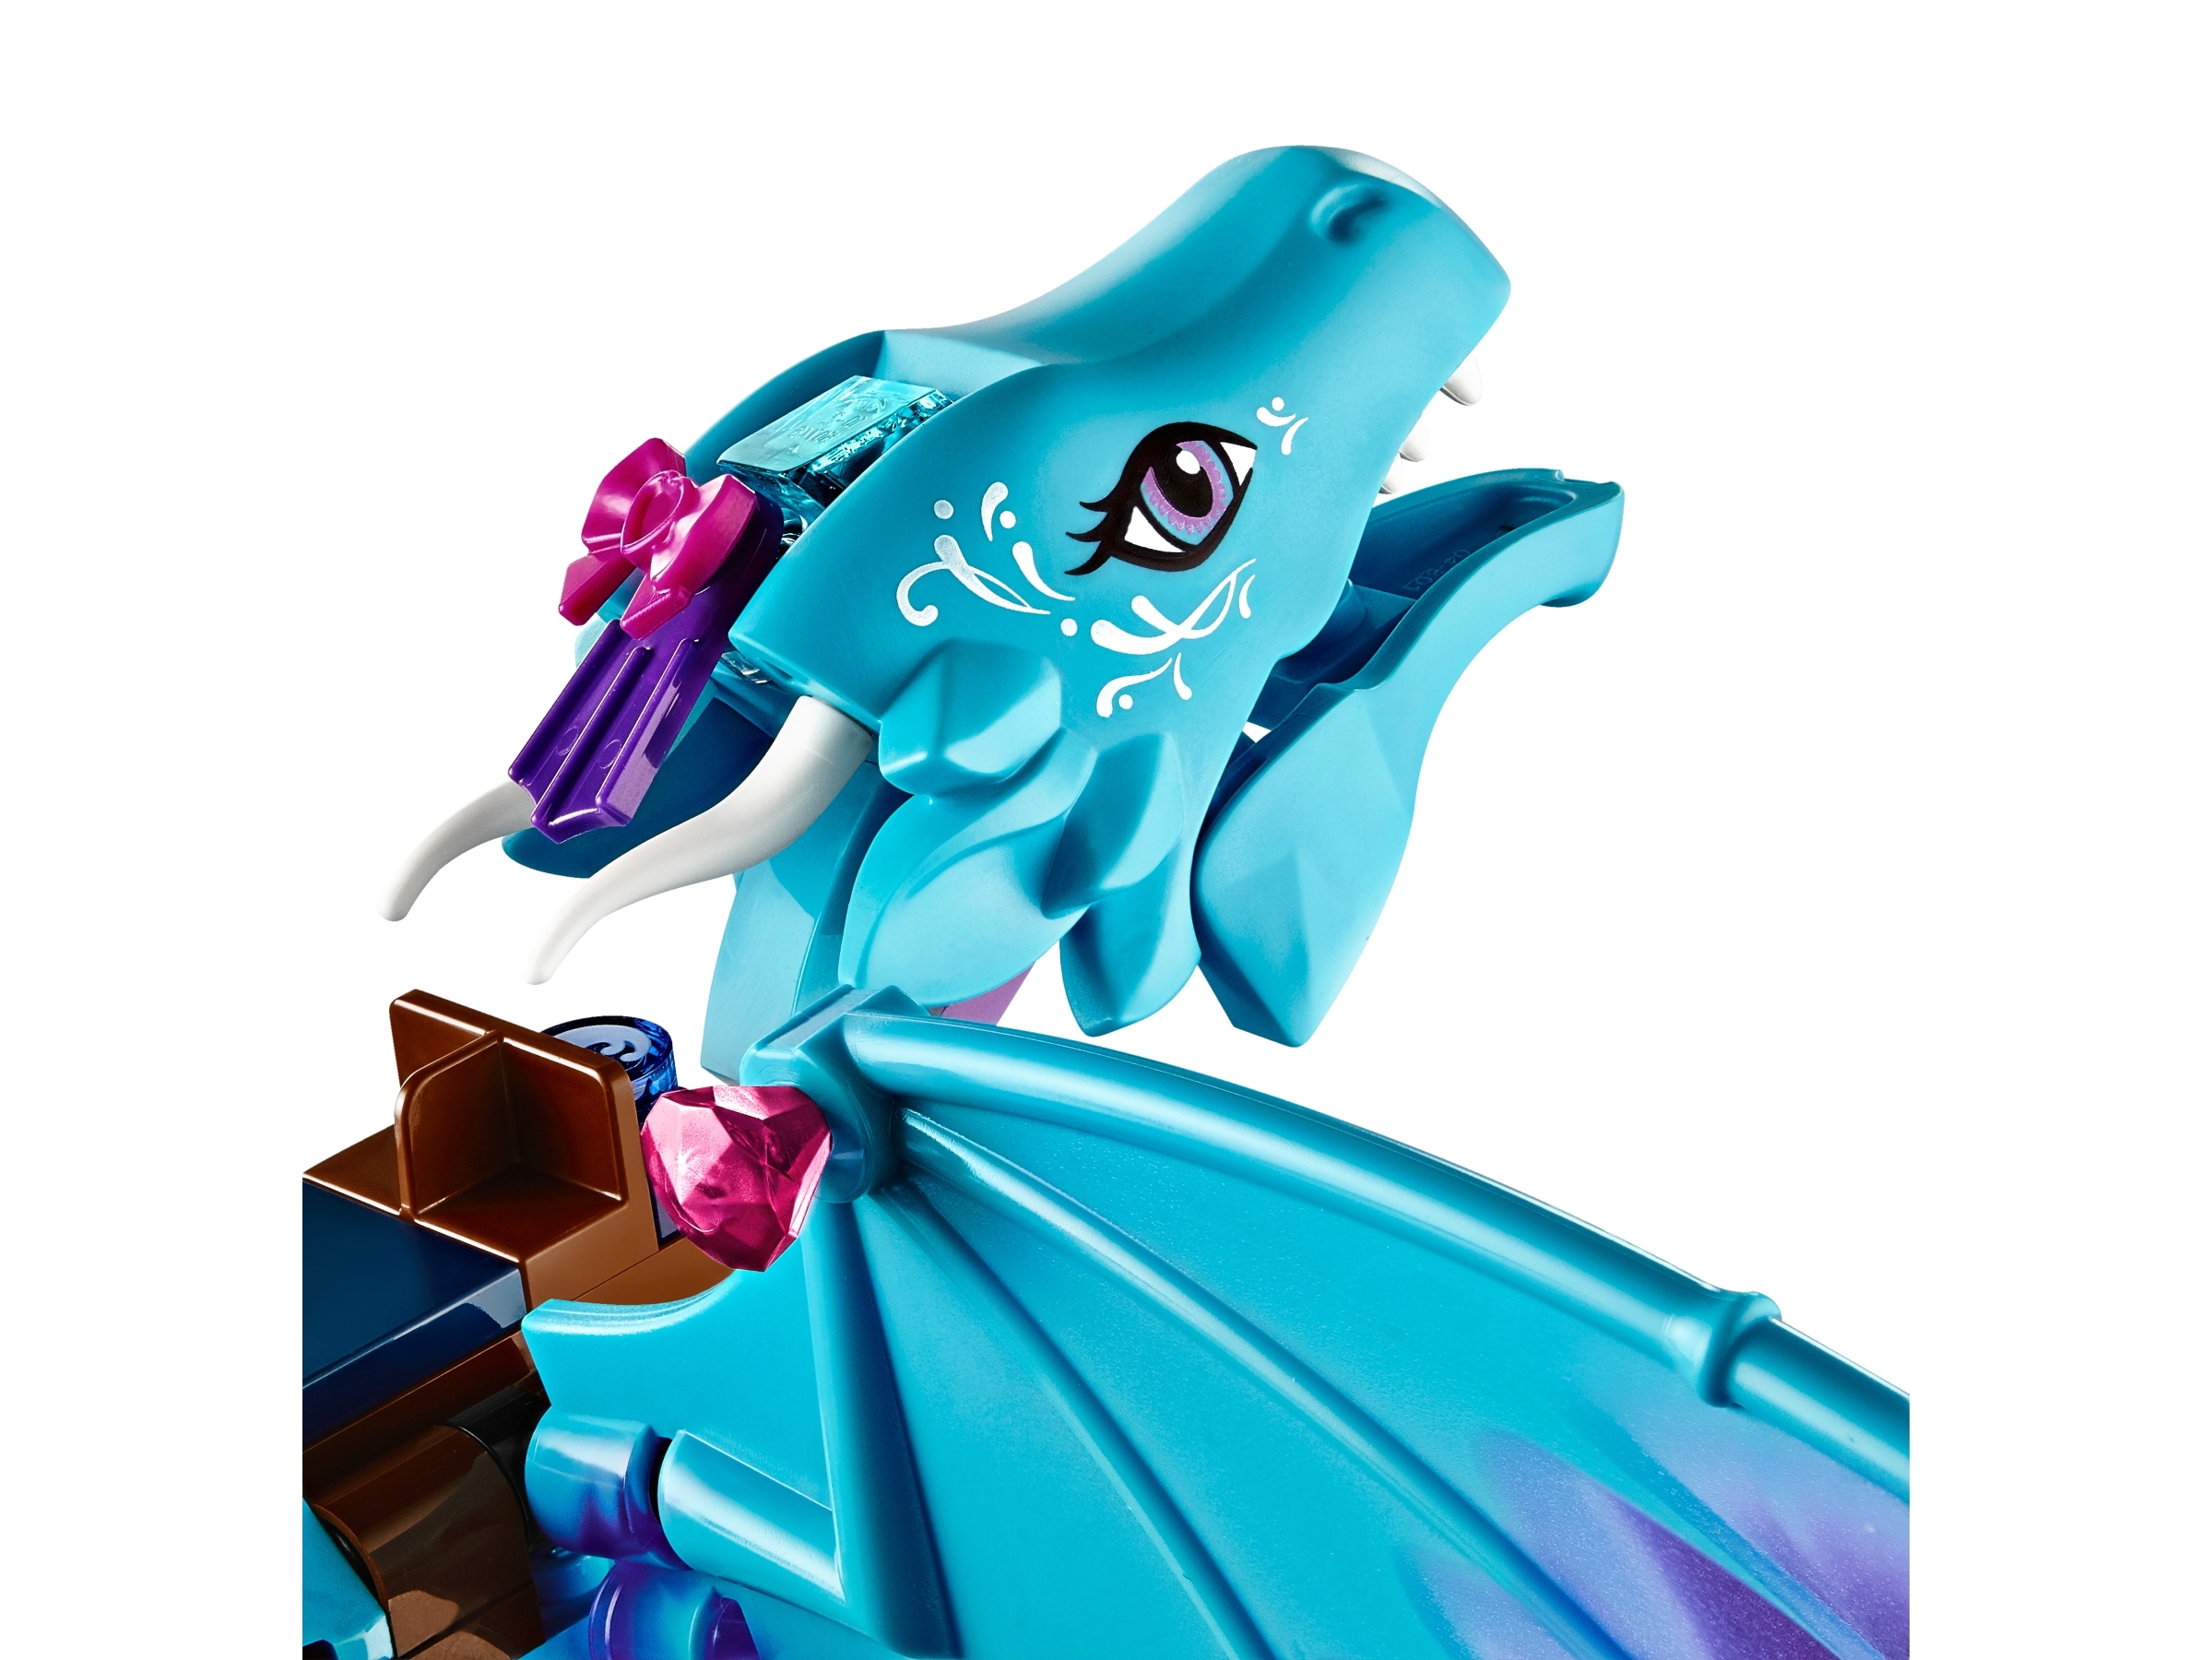 41172 for sale online Lego Elves The Water Dragon Adventure 